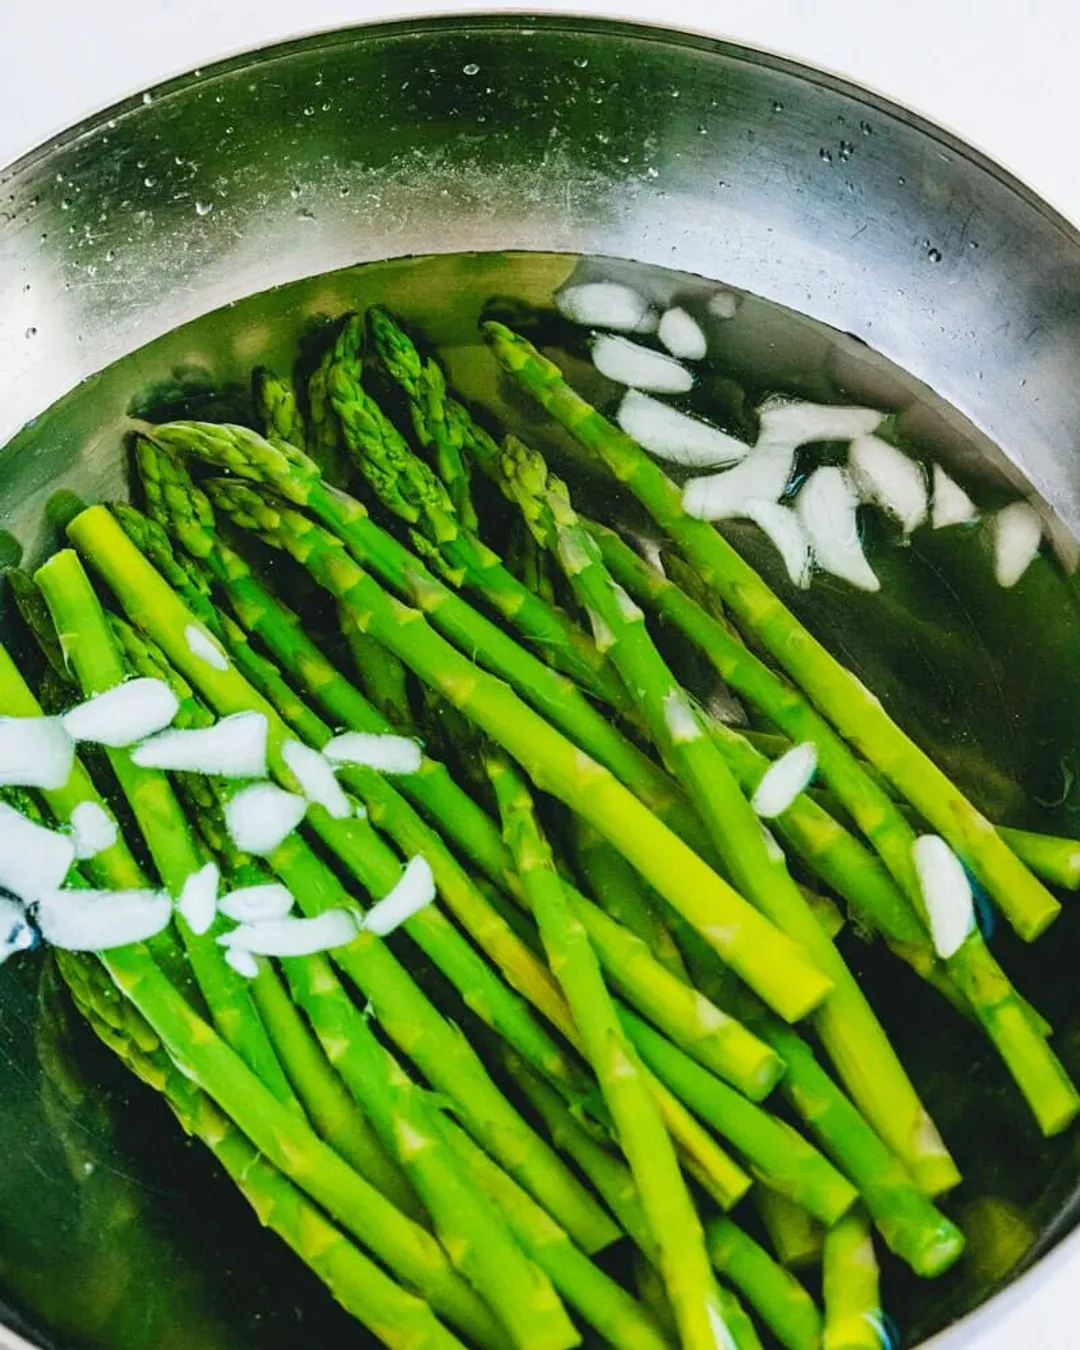 Properly cool down your asparagus